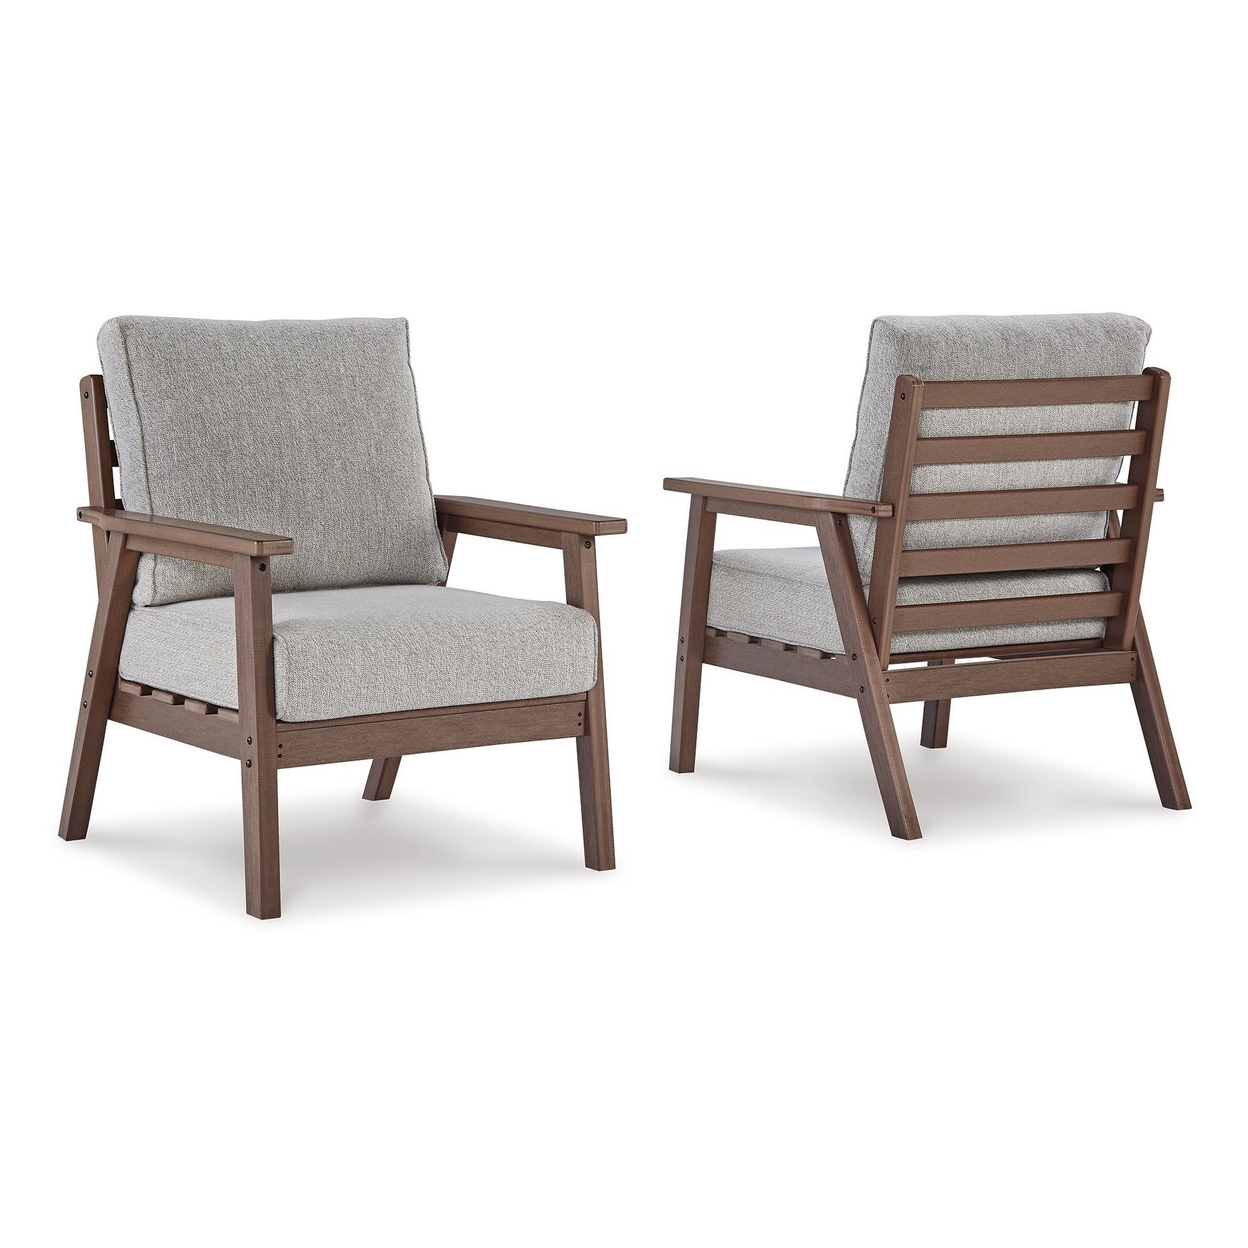 Emme 32 Inch Outdoor Lounge Chair Set Of 2, Brown Frame, Gray Cushions - Saltoro Sherpi